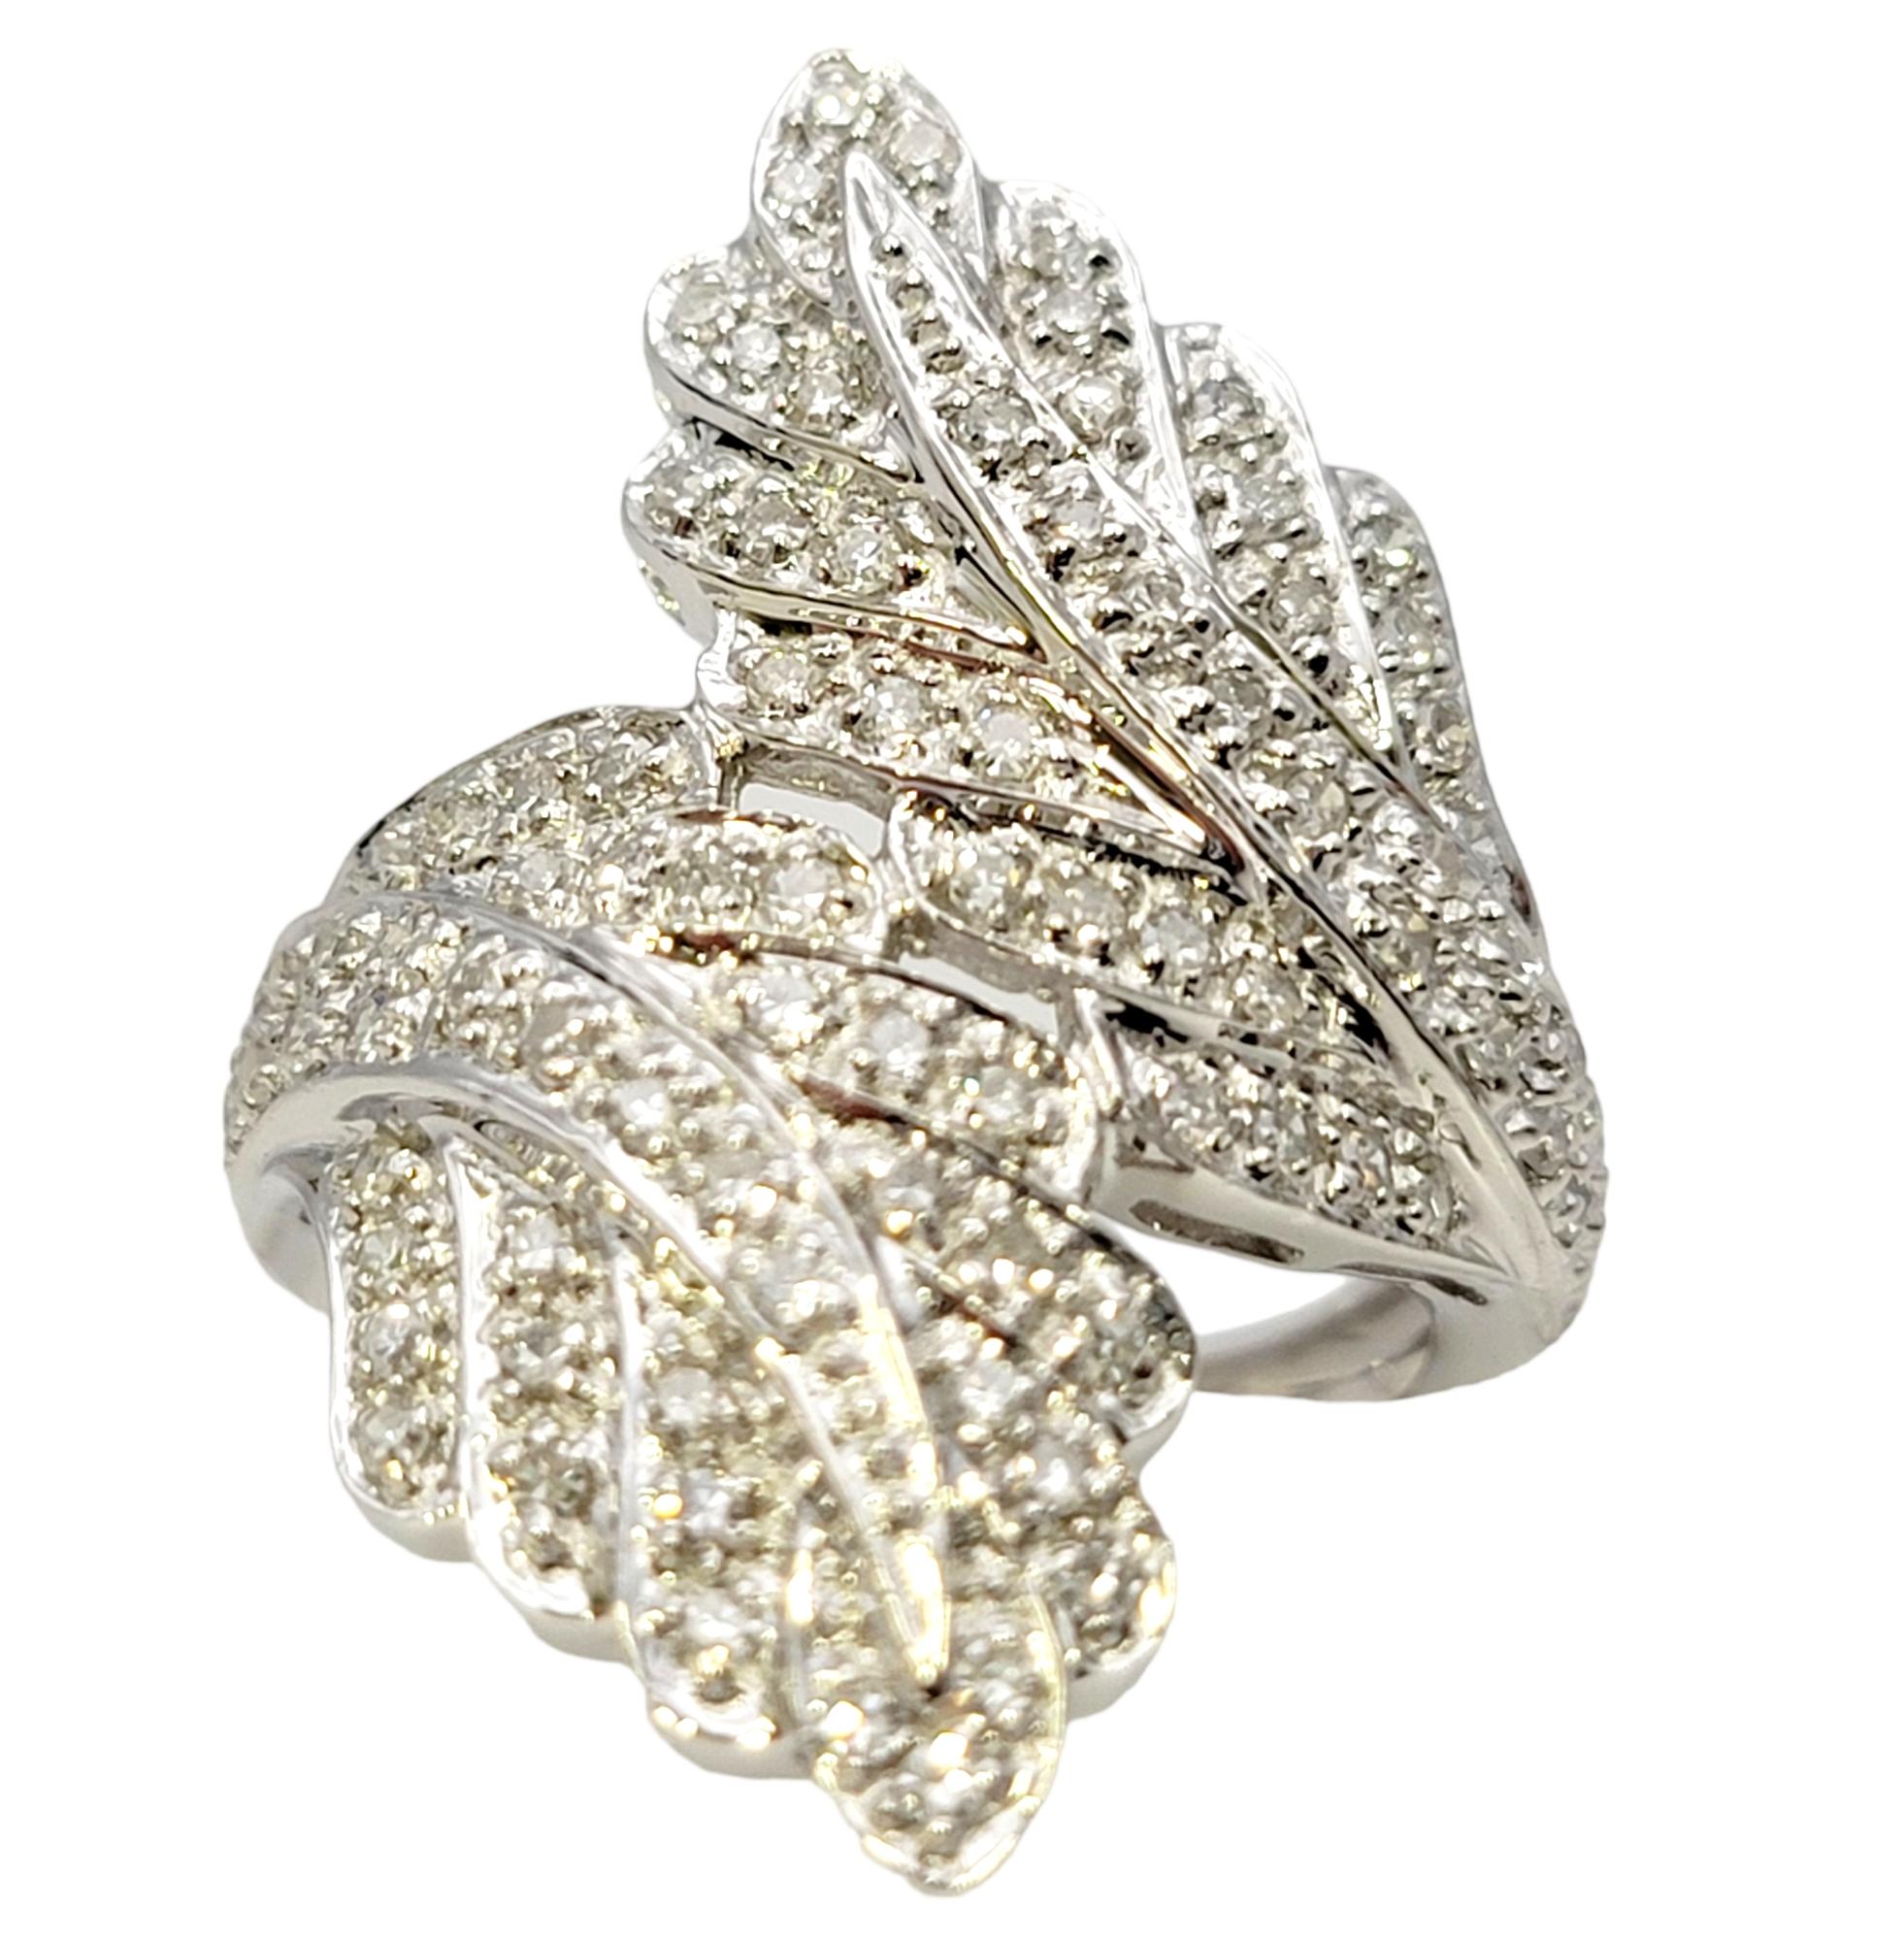 Ring size: 6

This spectacularly sparkly diamond bypass ring makes a stunning statement on the finger. Beautifully textured and glittering, this substantial ring will not go unnoticed.  

This superb cocktail ring offers the perfect balance of